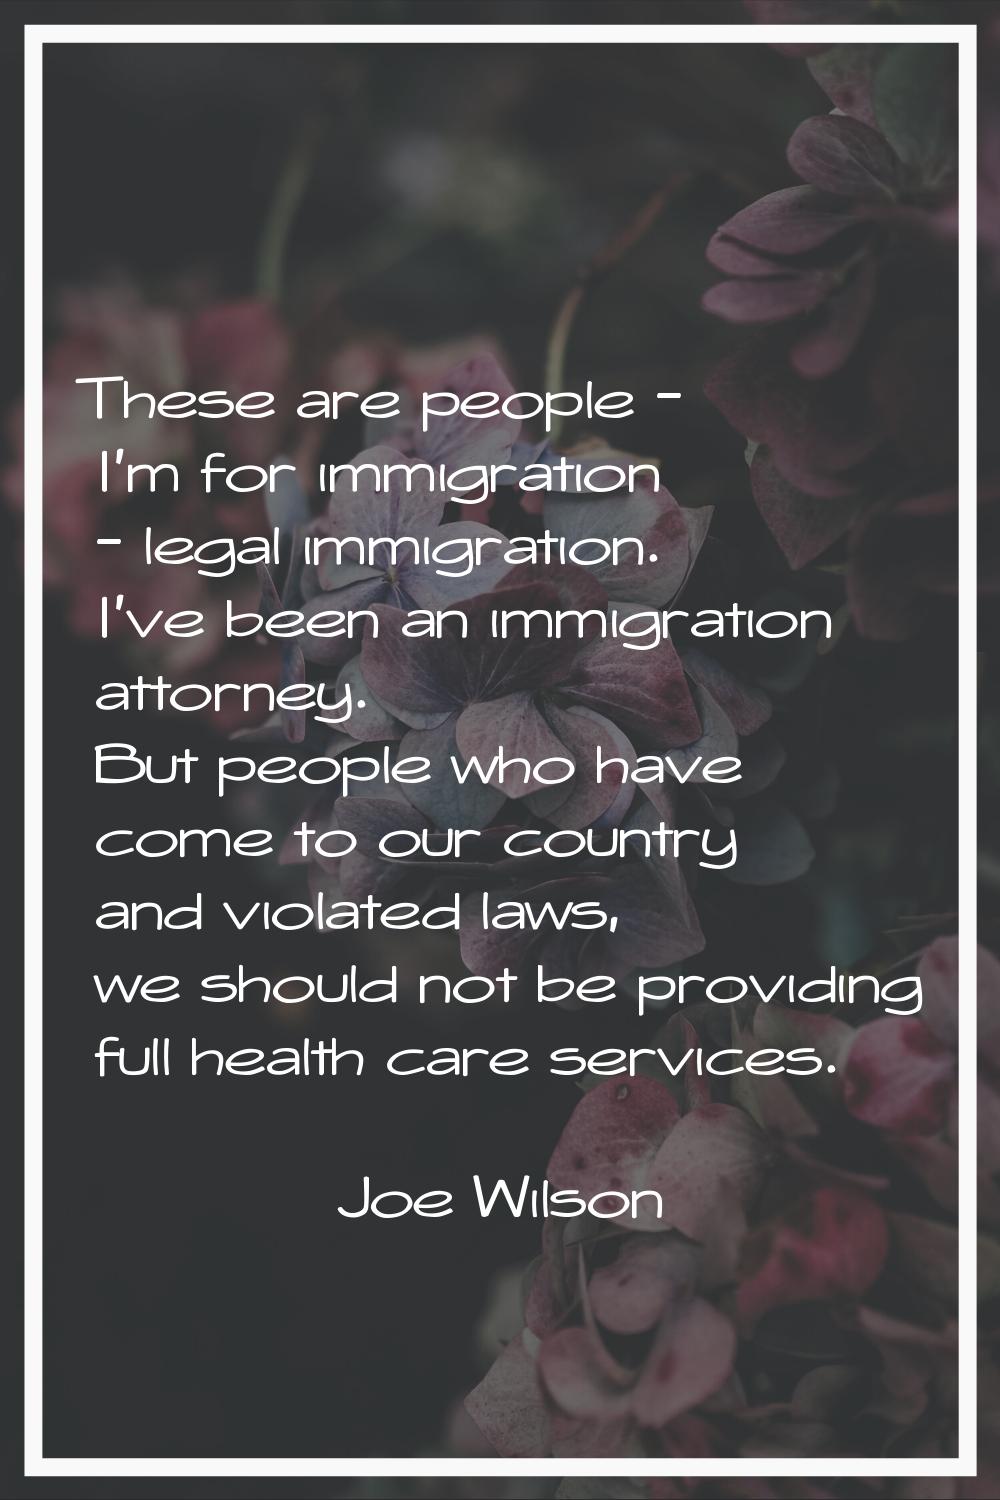 These are people - I'm for immigration - legal immigration. I've been an immigration attorney. But 